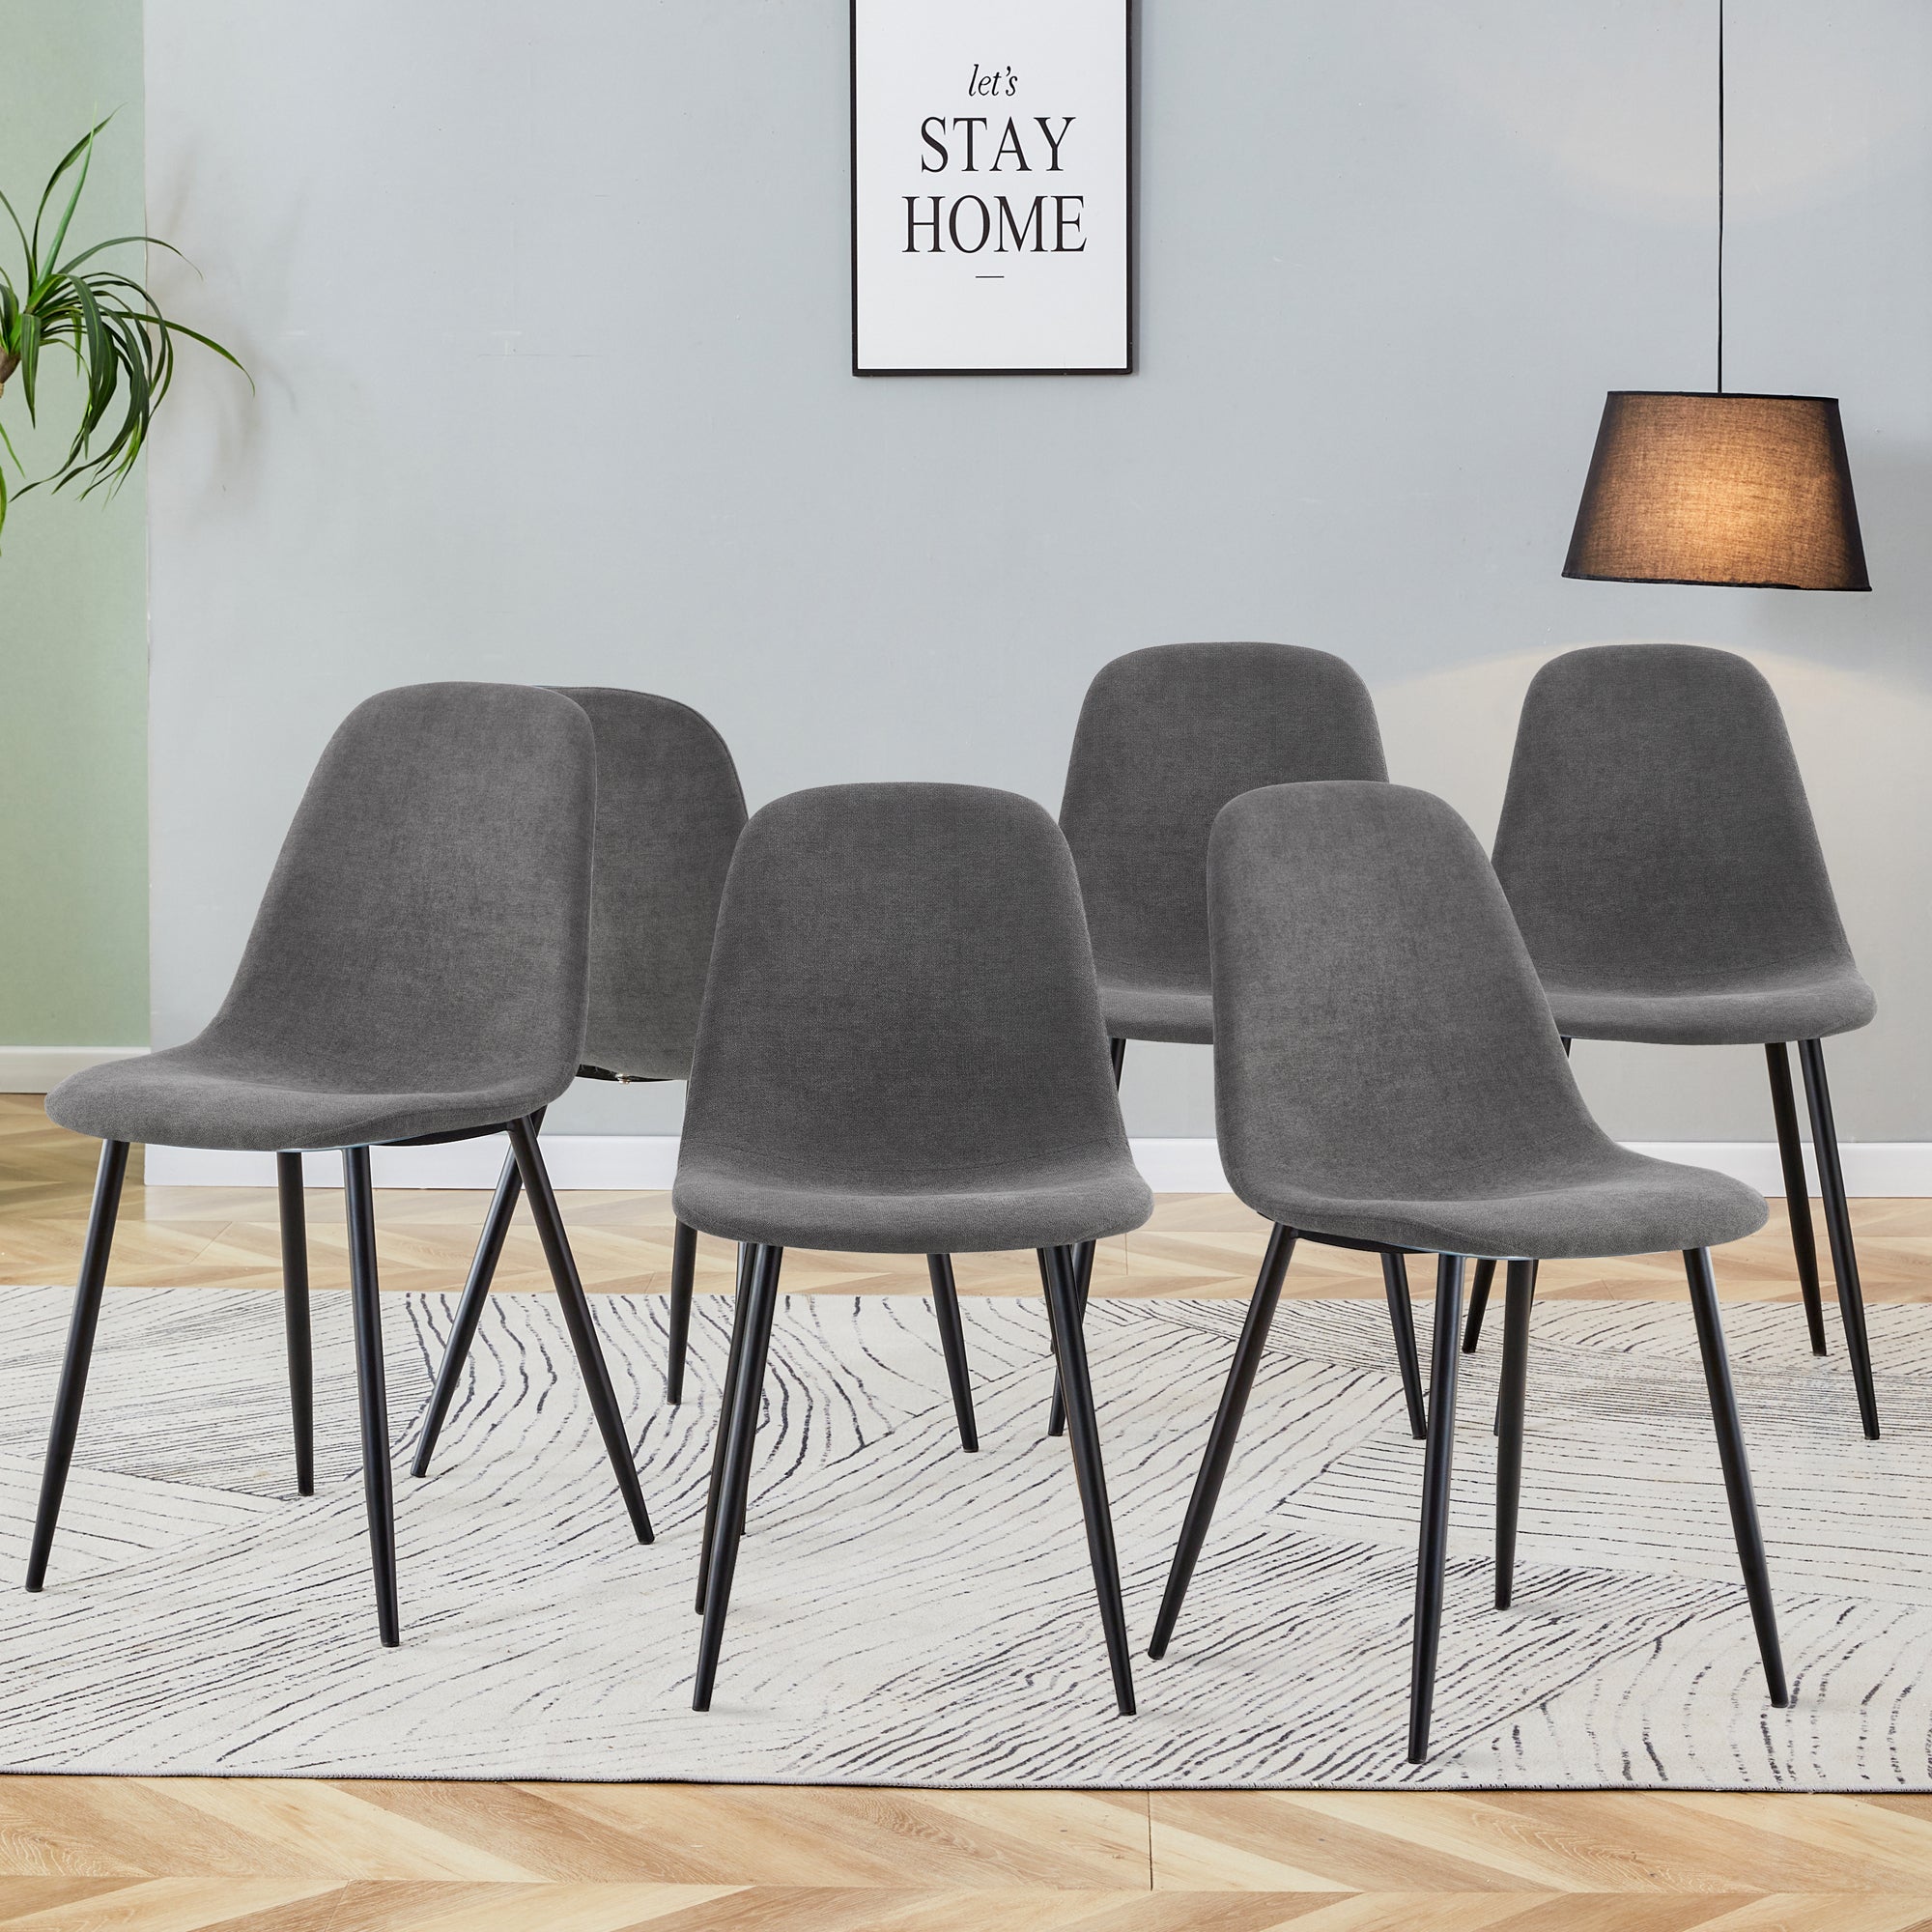 Set of 6 Gray Linen Upholstered Dining Chairs with Black Metal Legs